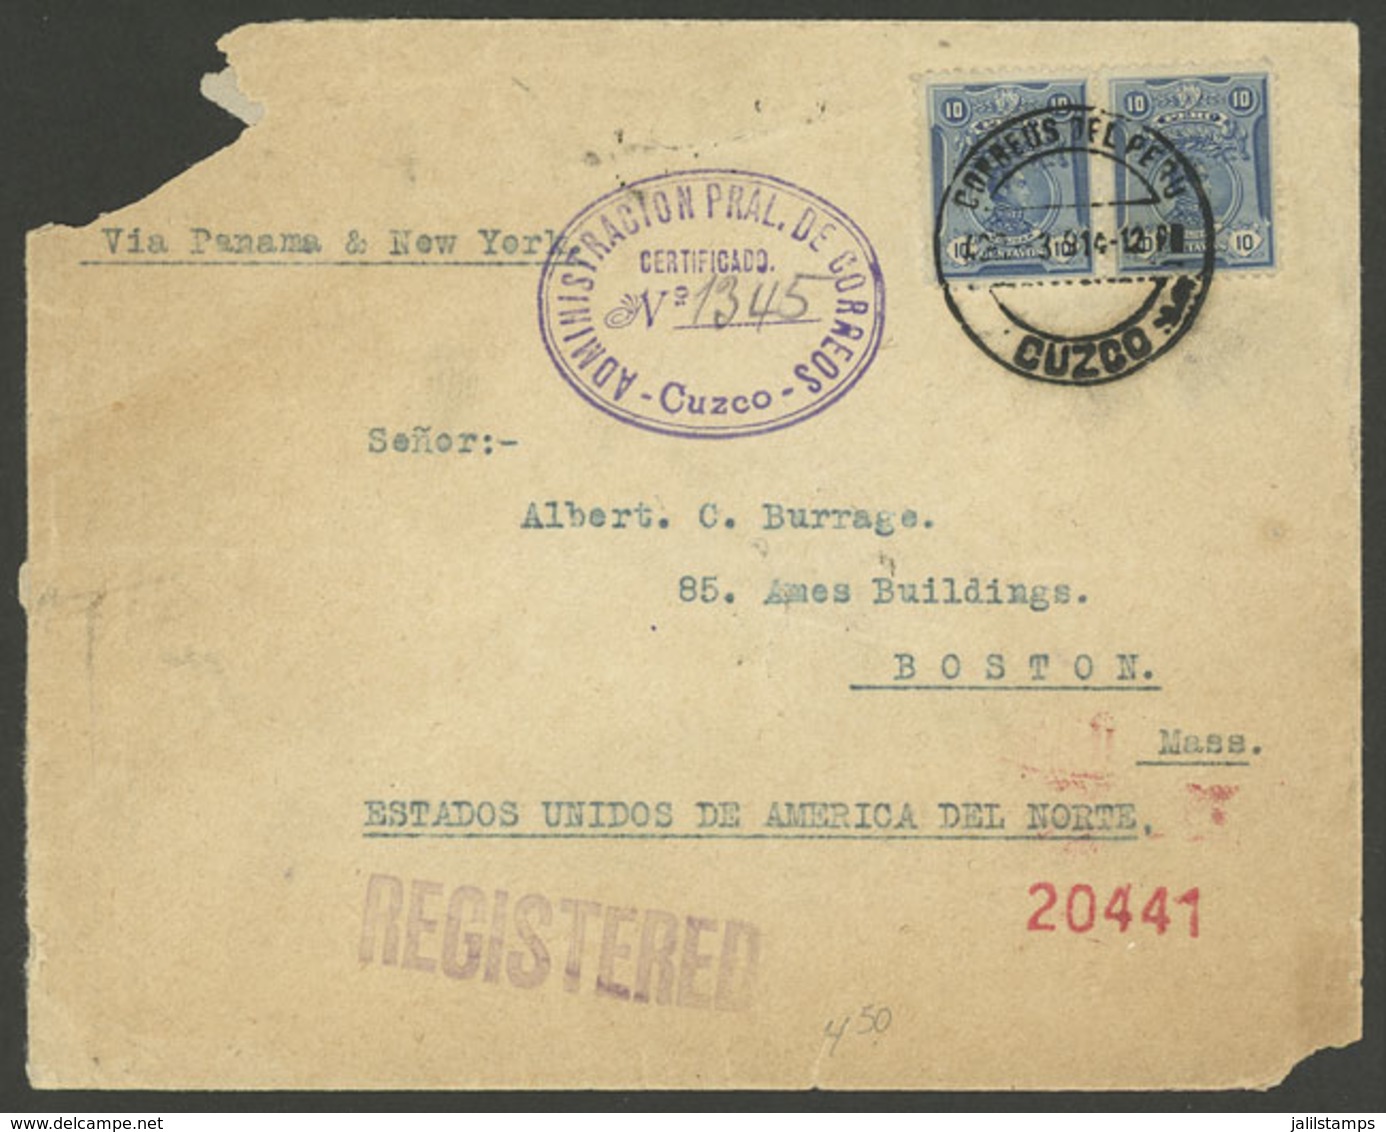 PERU: 30/MAR/1914 Cuzco - USA, REGISTERED Cover With Unusual Postage Of 20c., With Attractive Violet Oval Registration M - Perú